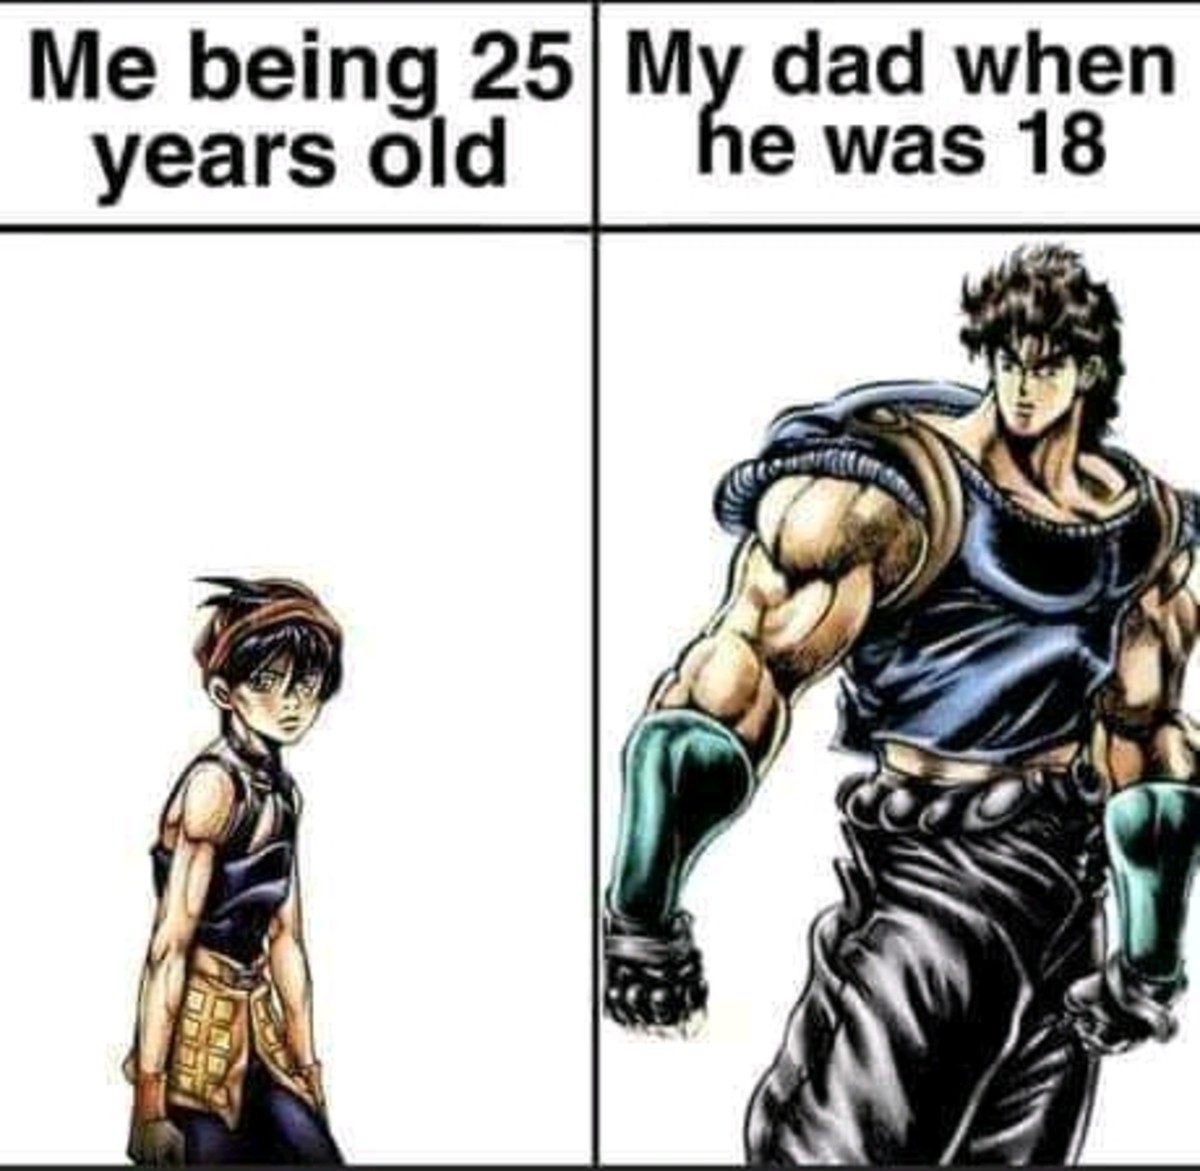 My dad was chad 10.0. .